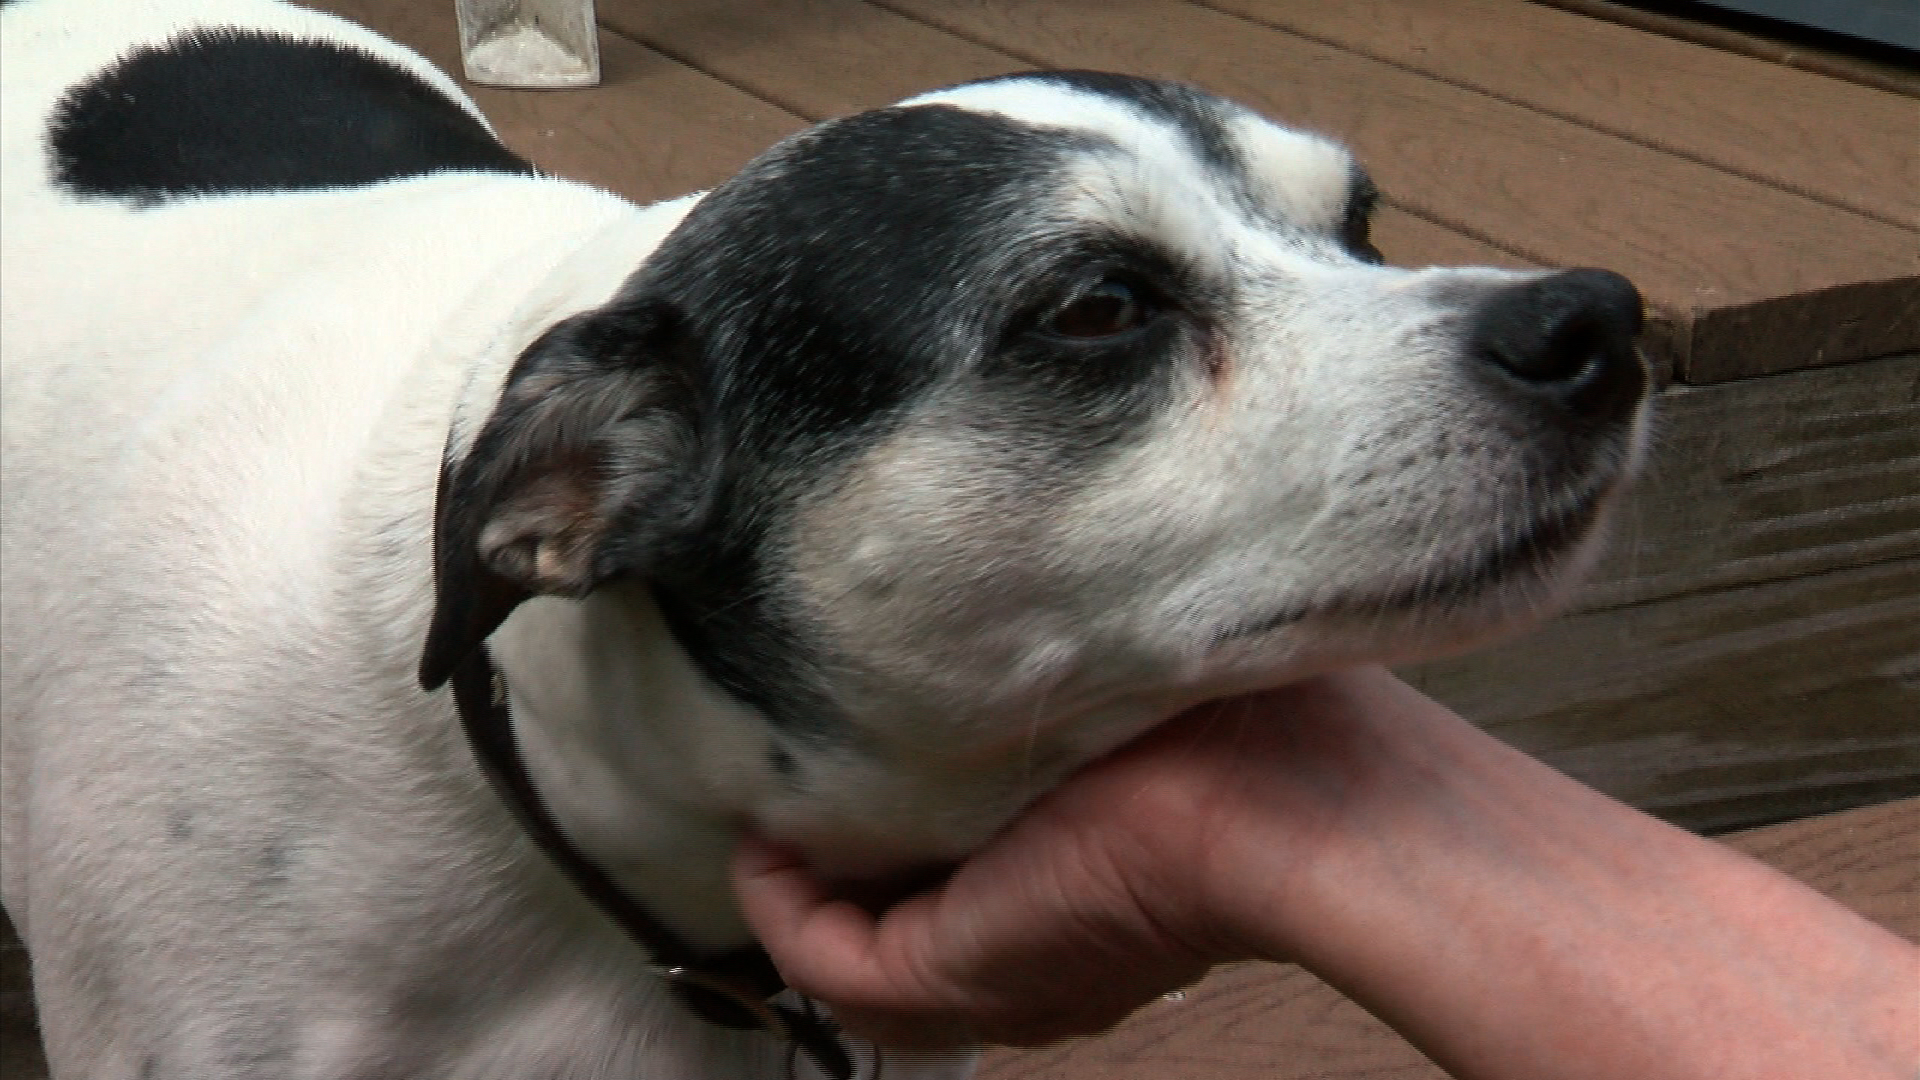 Lola, dog that survived poisoning (credit: CBS)